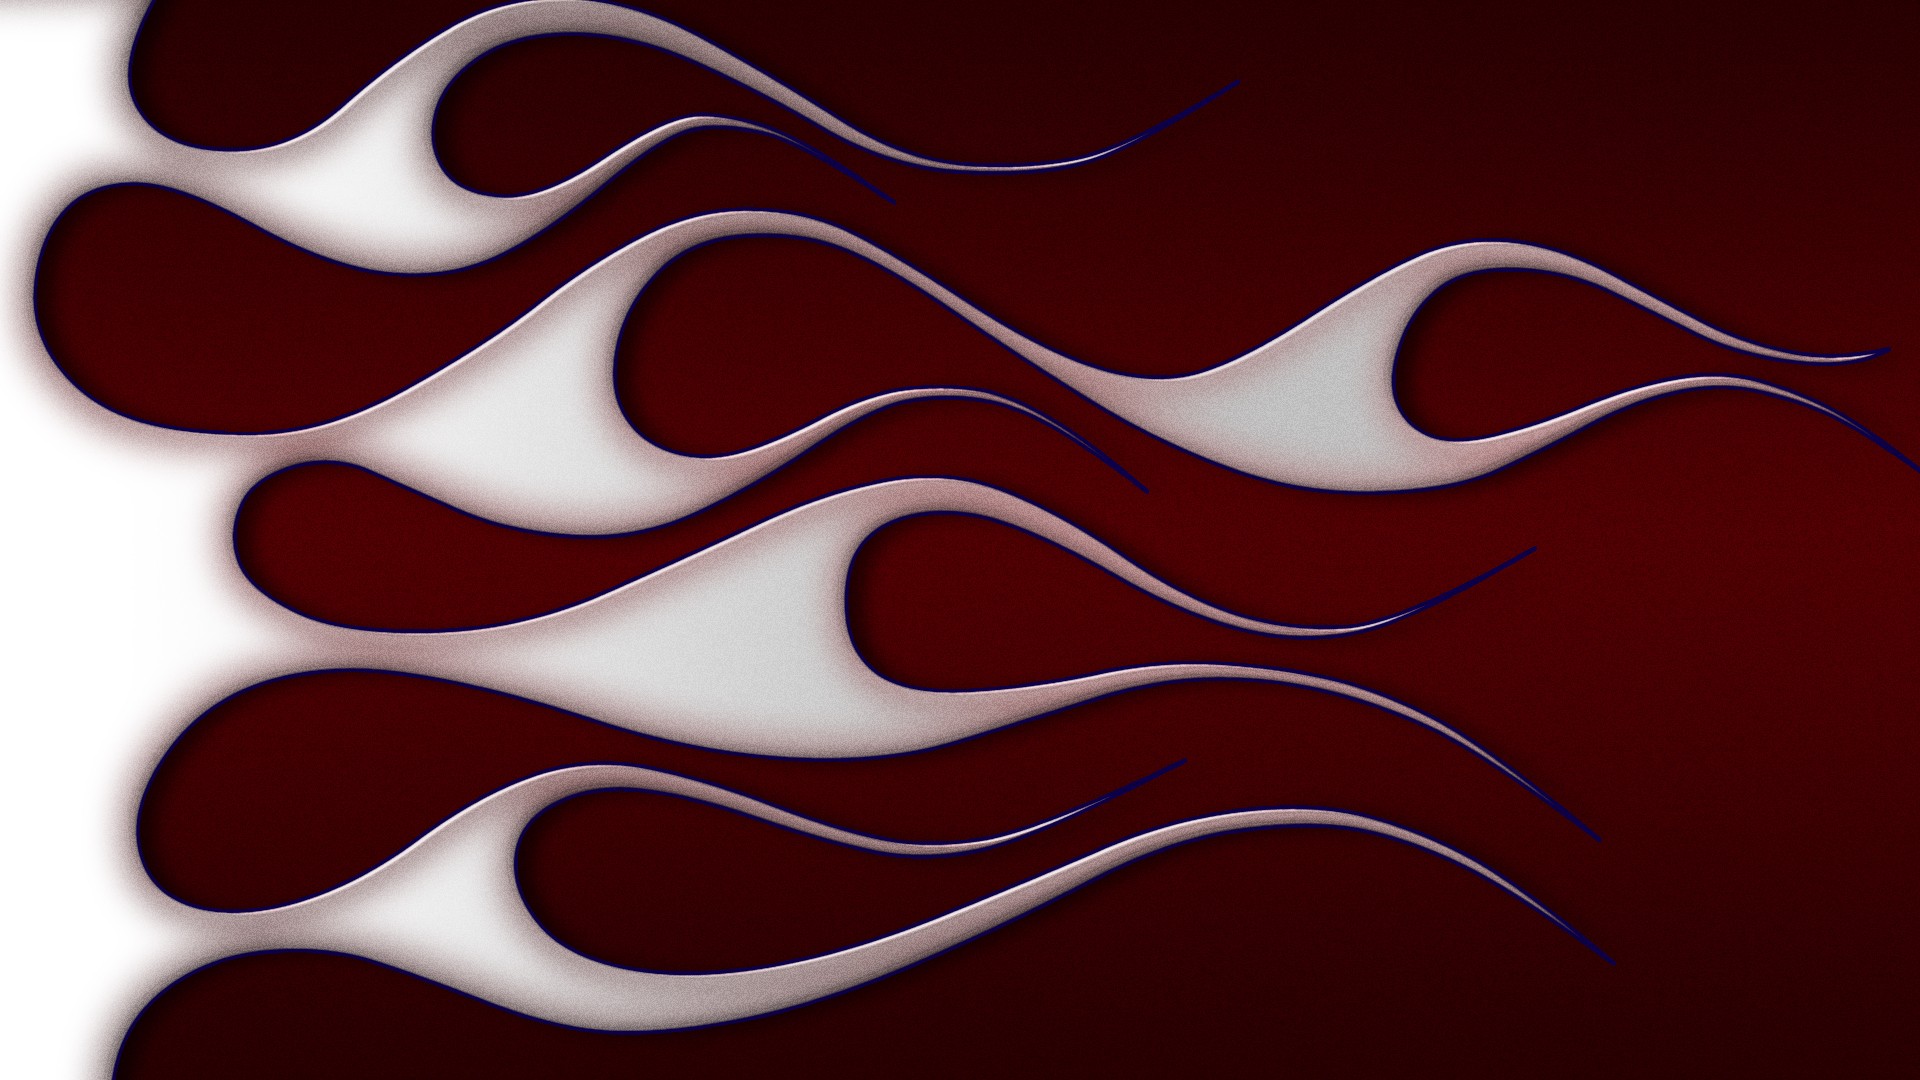 Abstract Flames Wallpaper 1920x1080 Abstract Flames Red 1920x1080